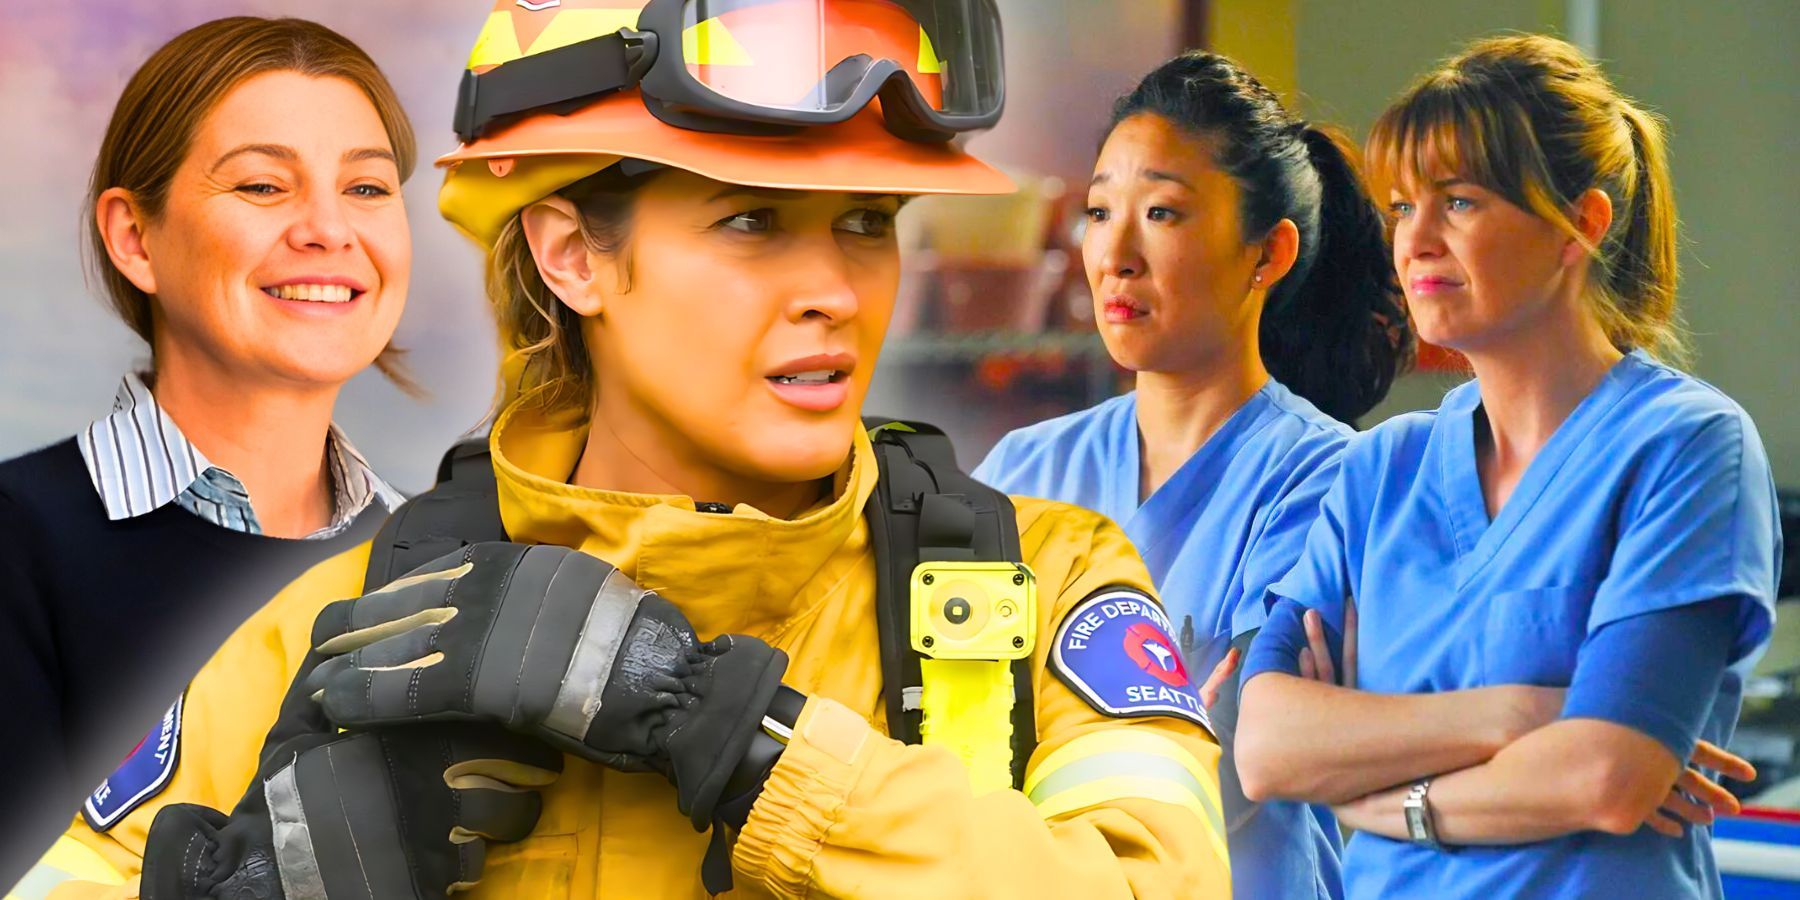 Andy Herrera looks serious in the Station 19 finale with a background featuring Ellen Pompeo as Meredith Grey smiling in Grey's Anatomy season 20 and upset Meredith and Cristina Yang (Sandra Oh) f